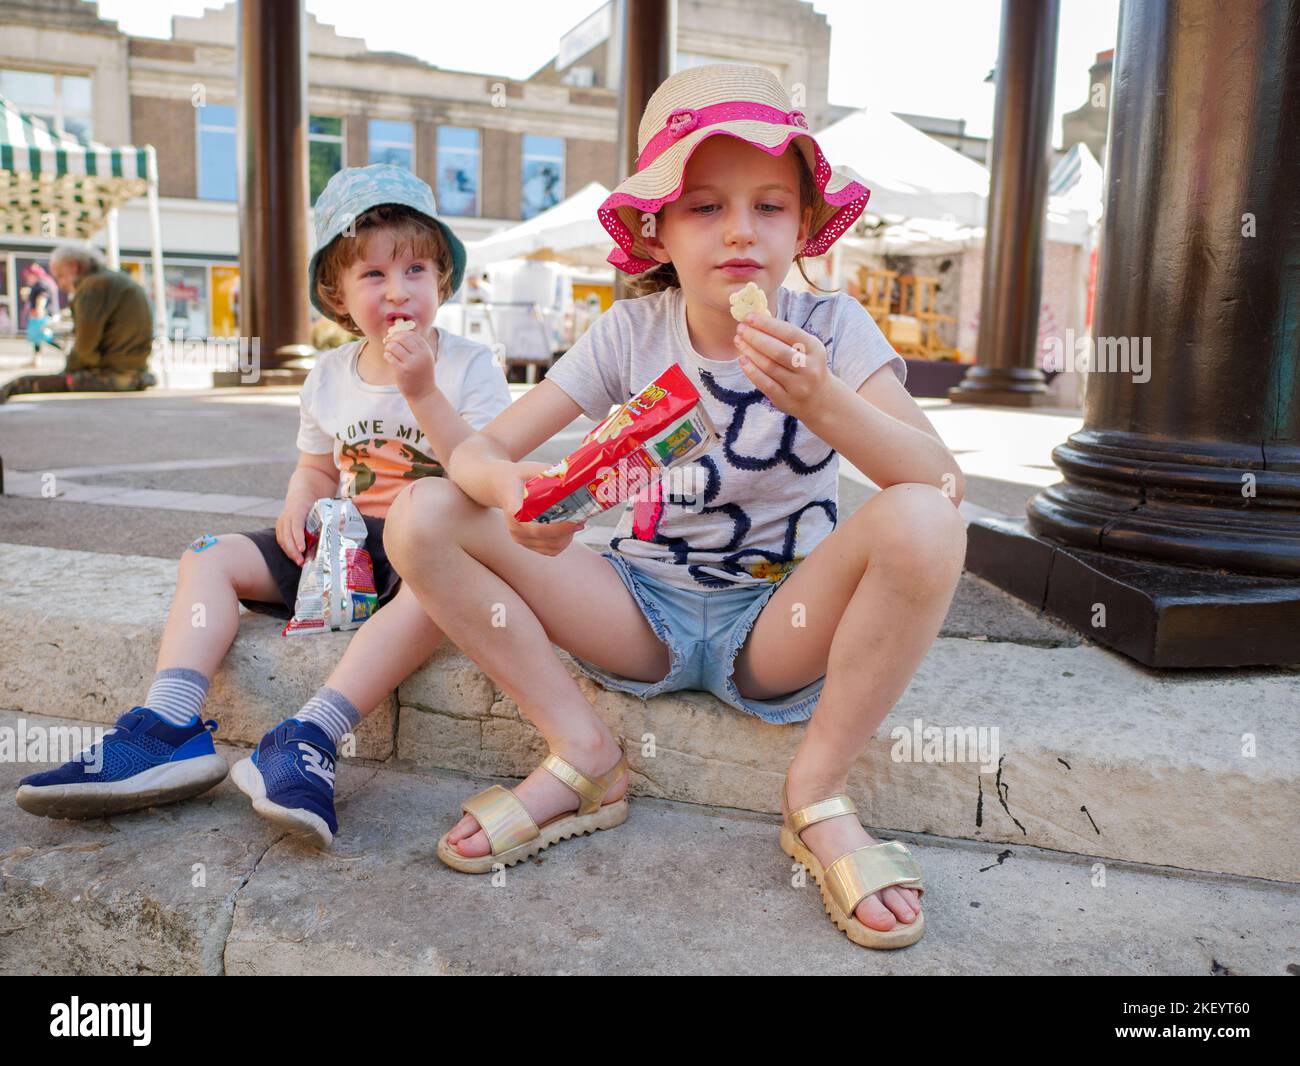 Young children, a boy and a girl, eating snacks sitting on the floor outside, UK Stock Photo